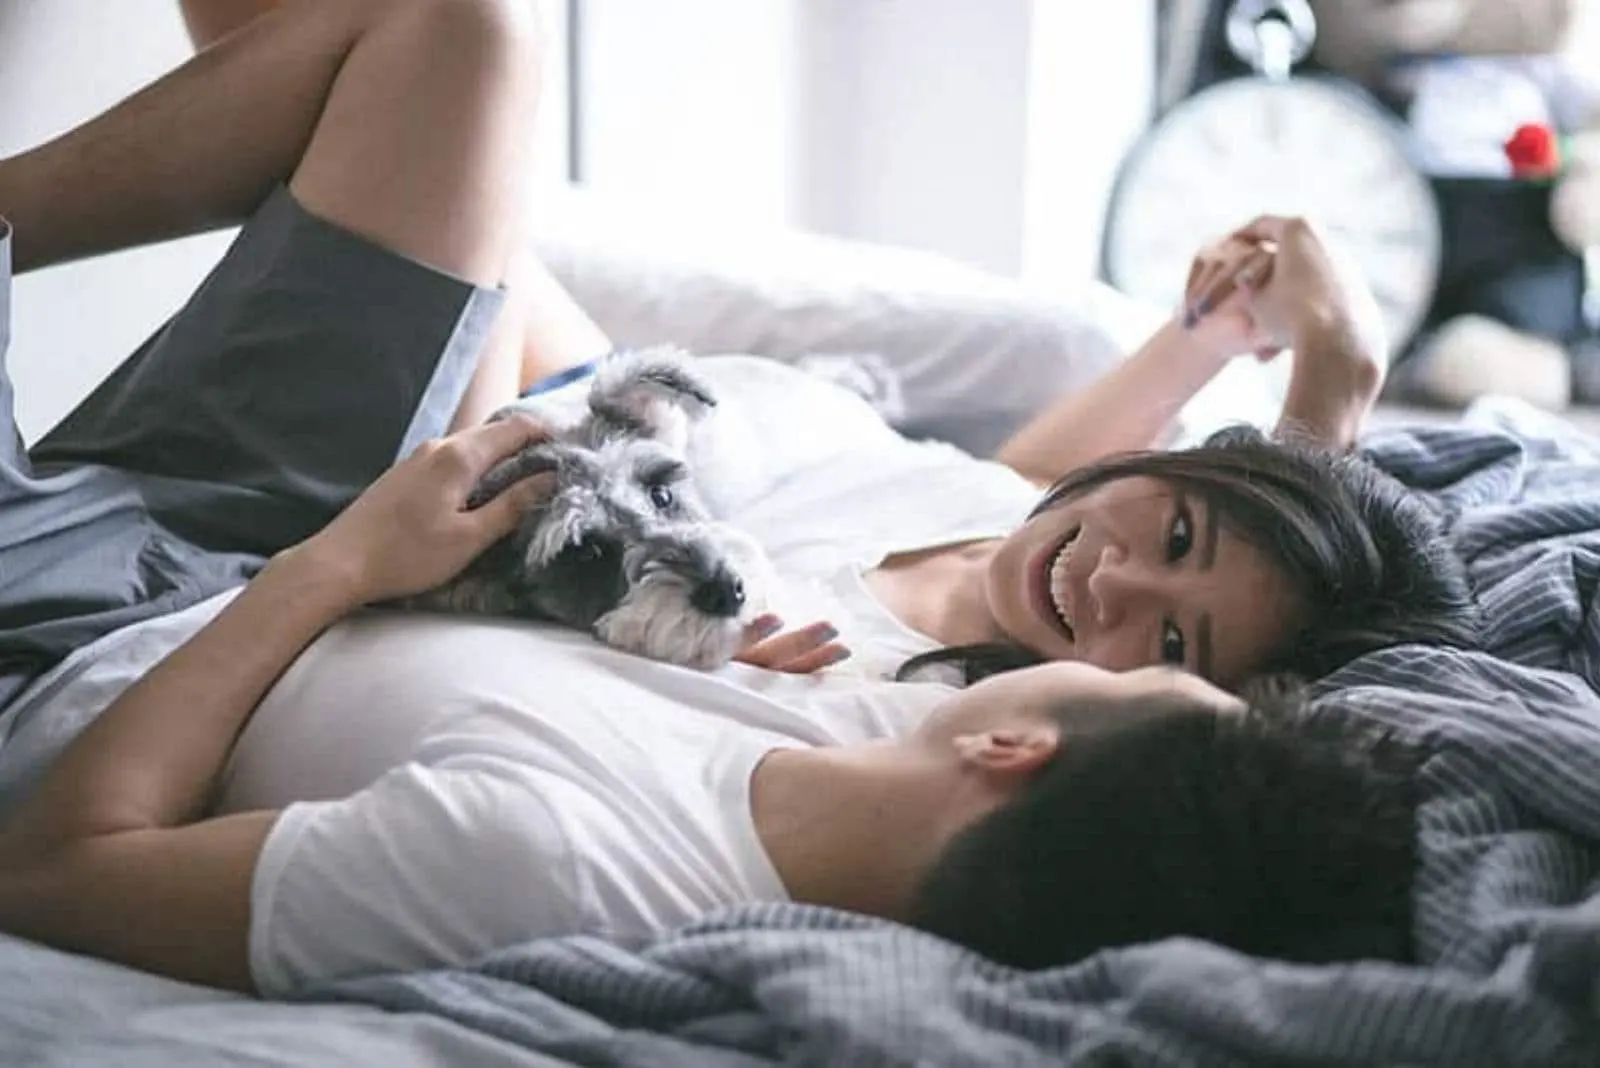 a man and a woman lie together on the bed embracing with a dog